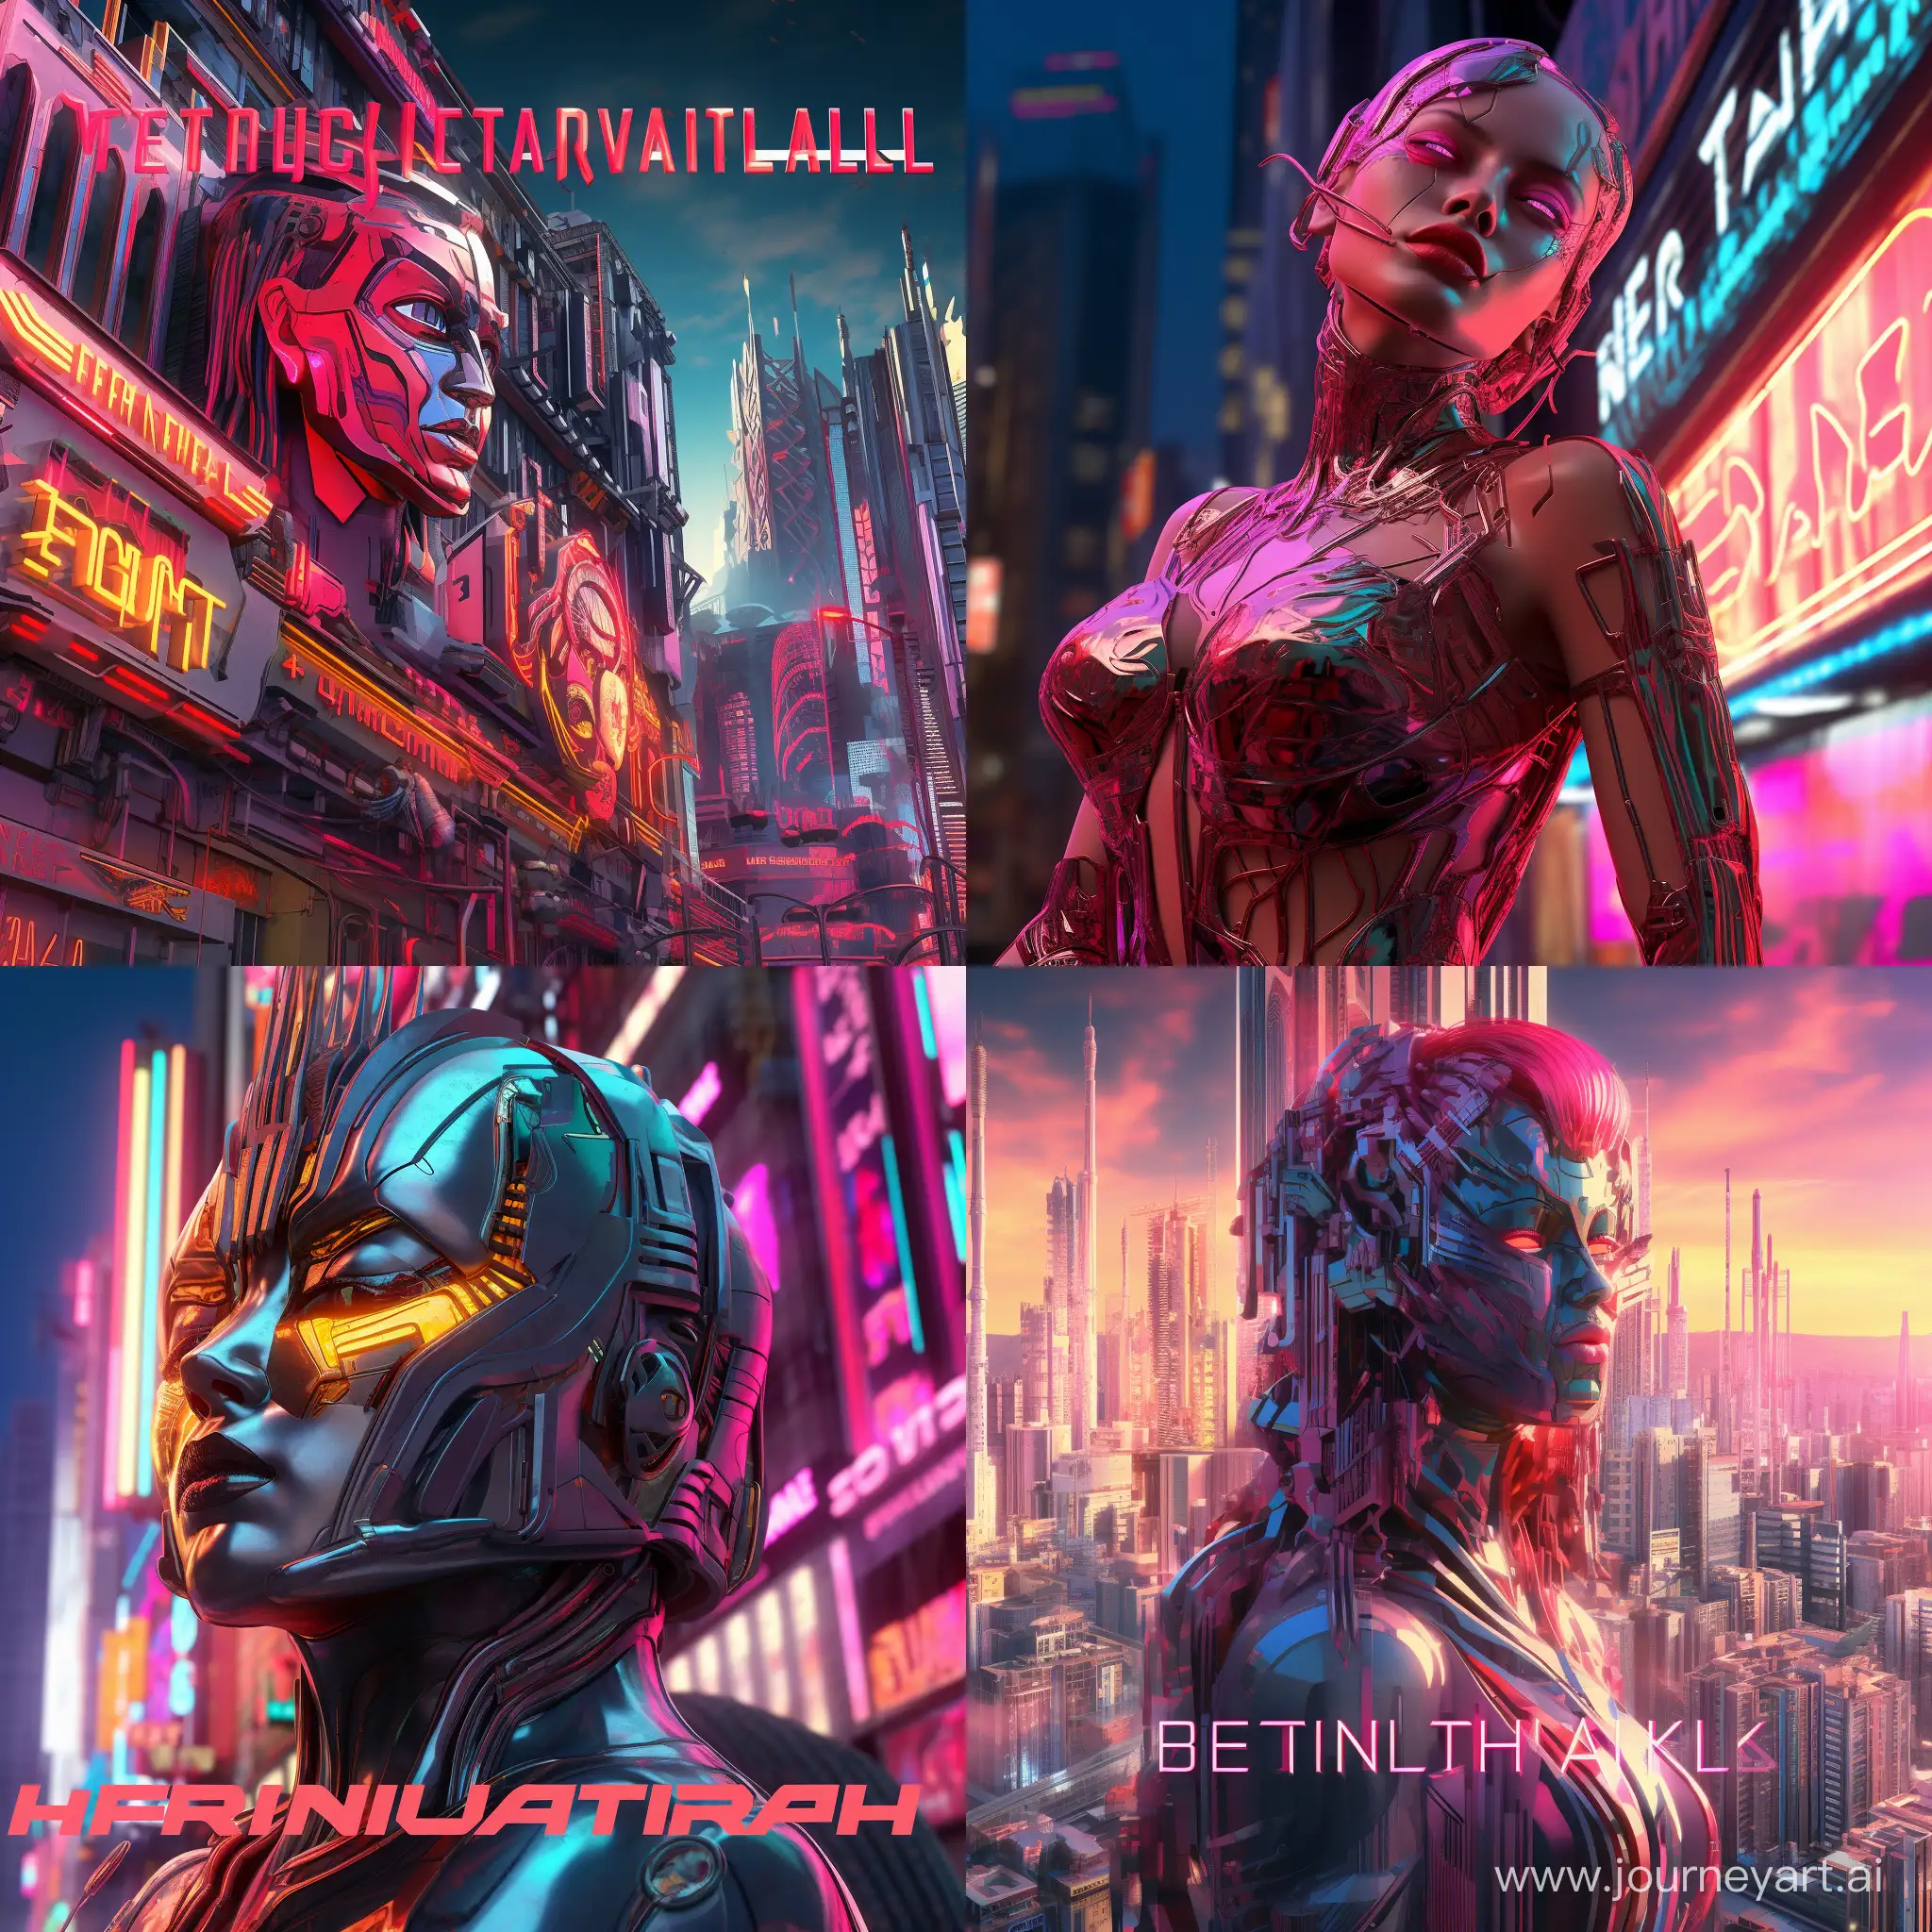 cover art for the track titled "beautiful" in cyberpunk style, 3d